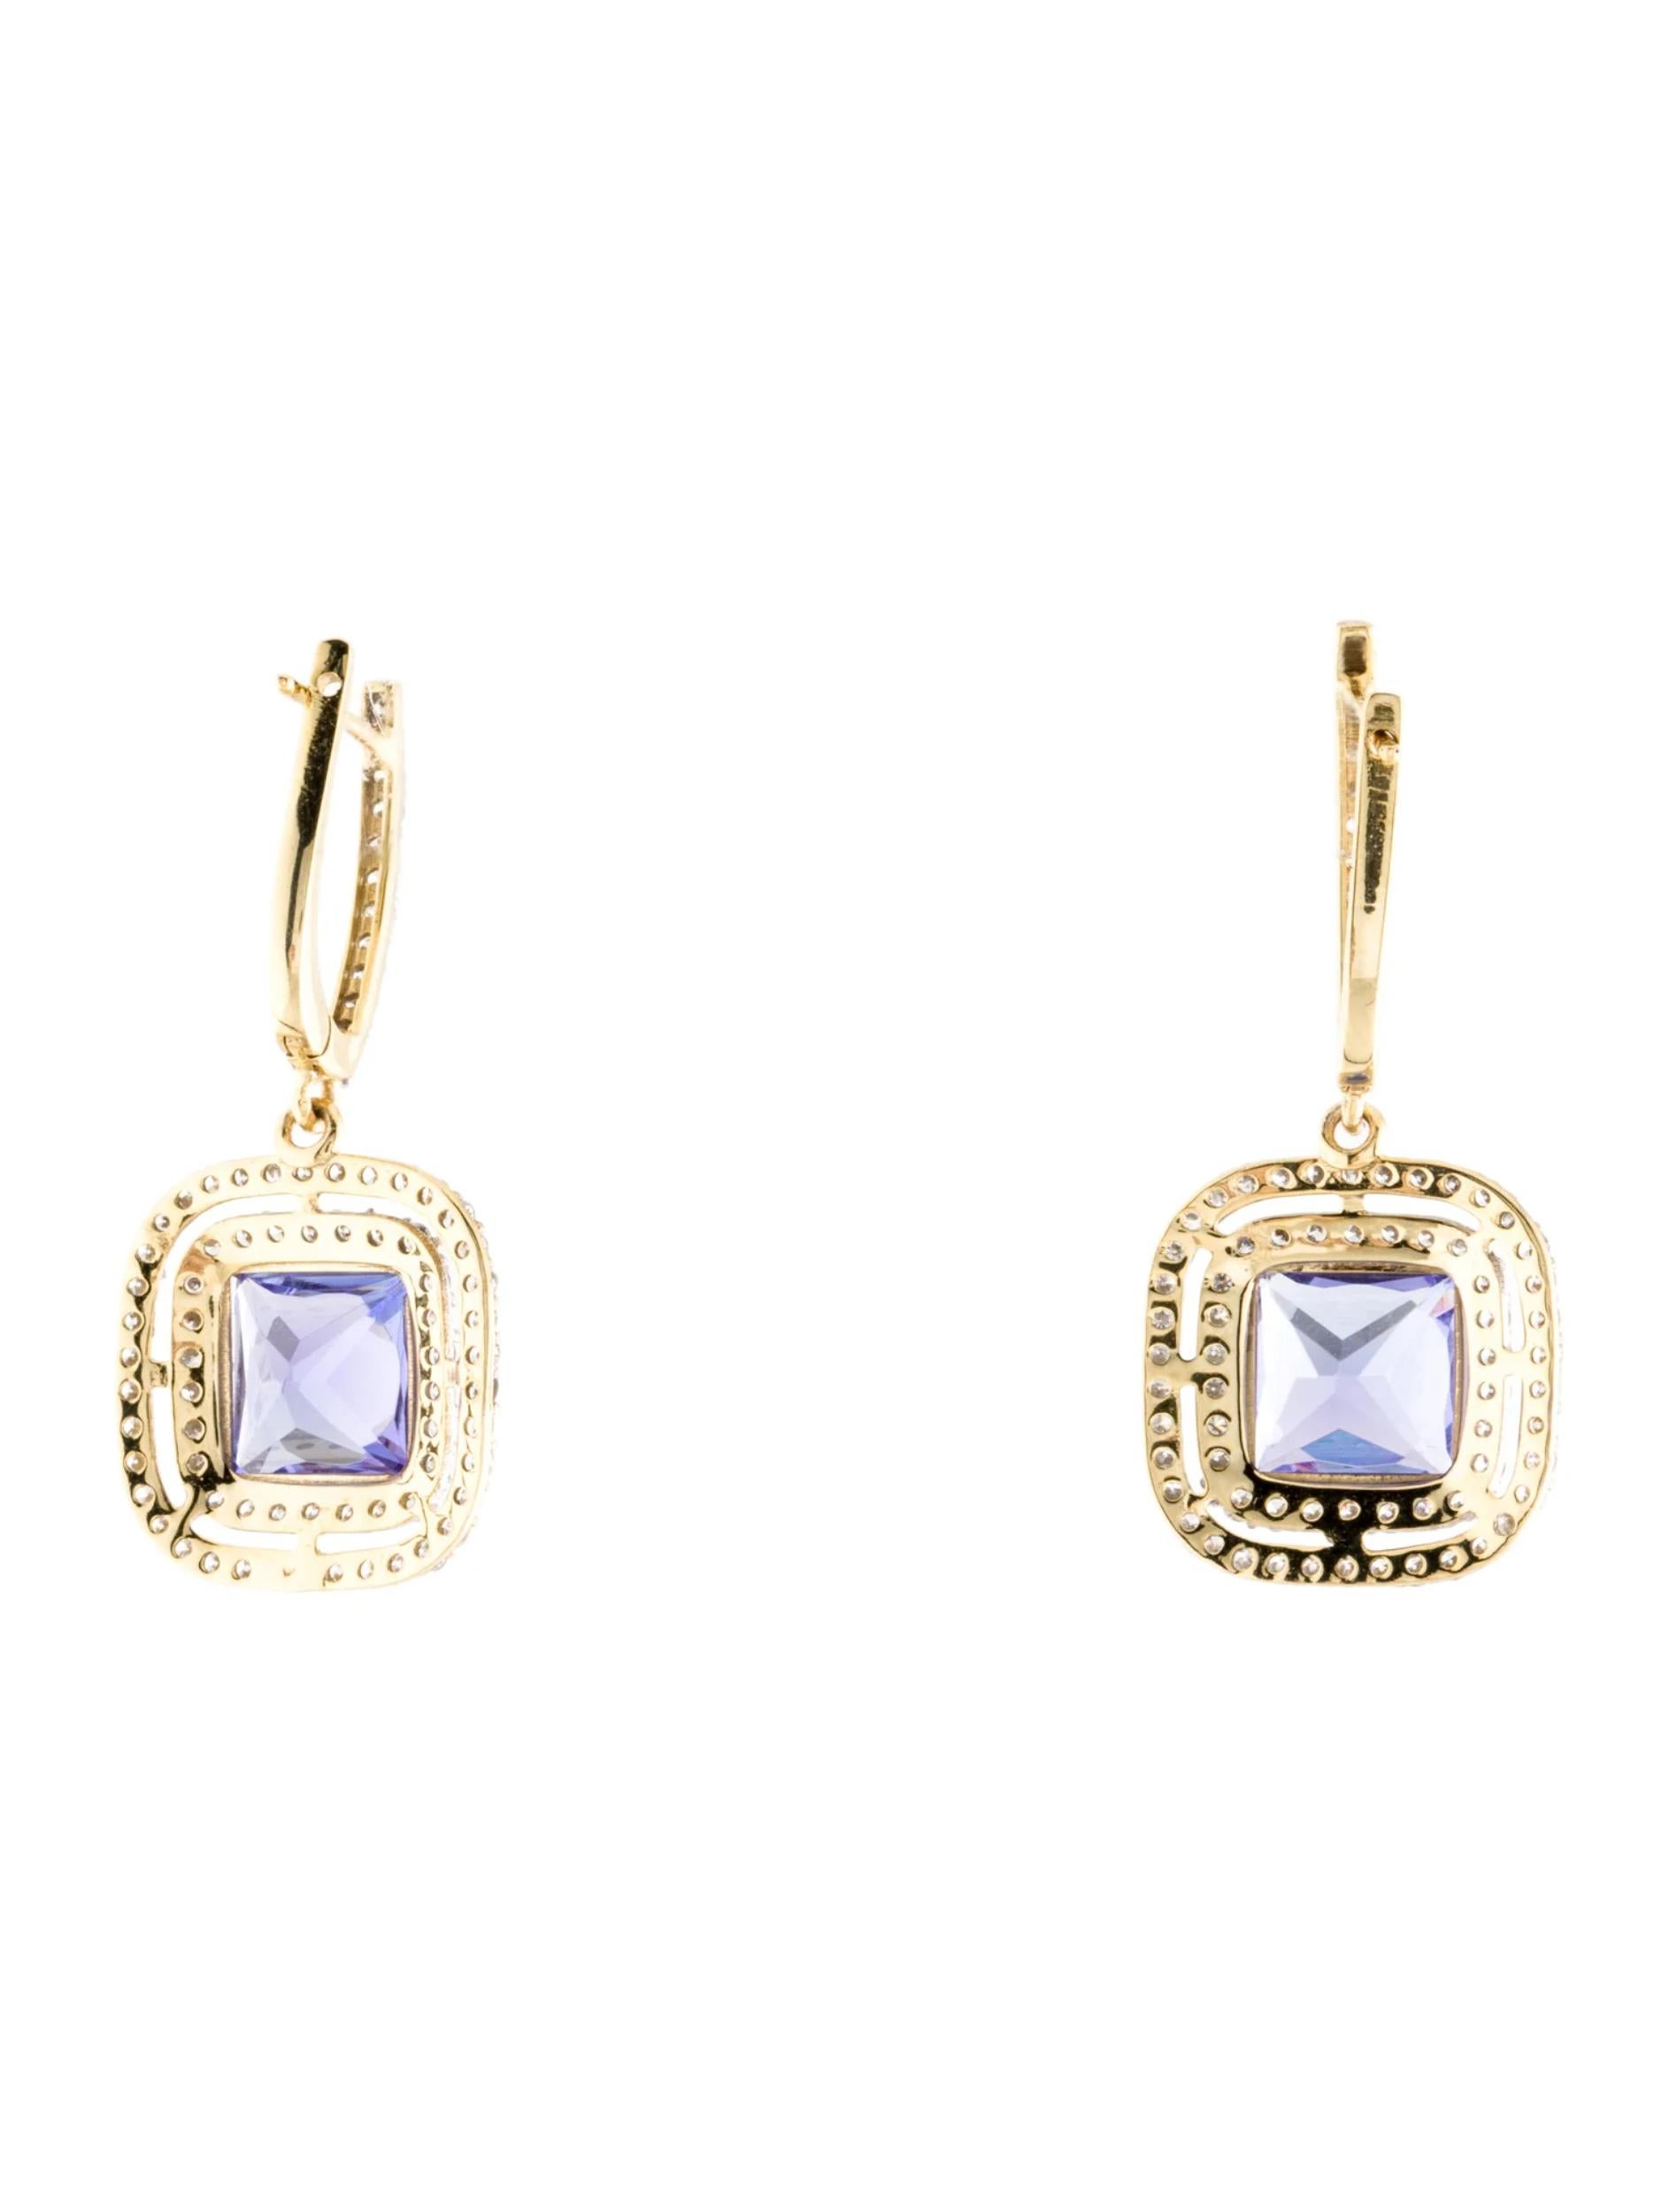 14K Tanzanite & Diamond Drop Earrings - Exquisite Sparkle, Timeless Elegance In New Condition For Sale In Holtsville, NY